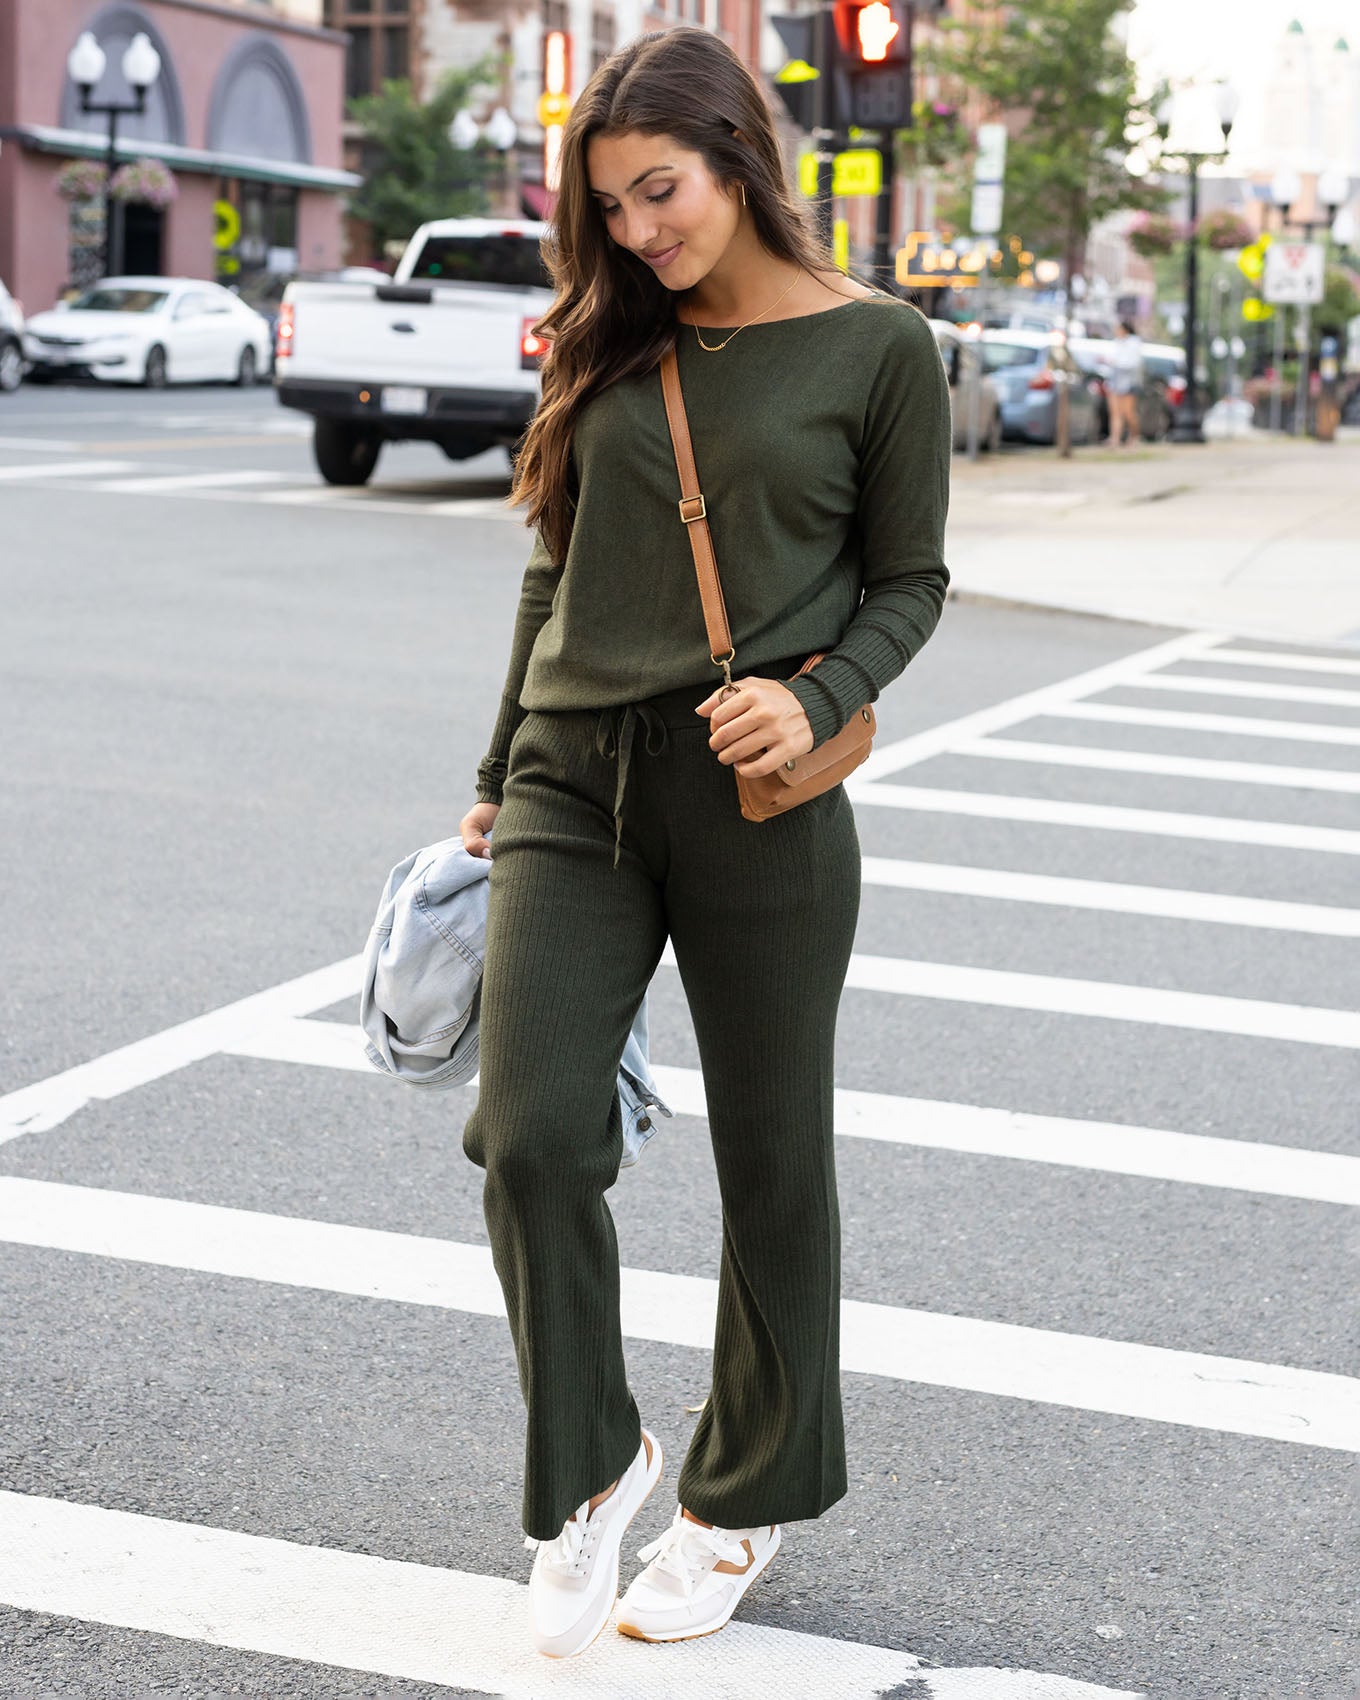 Women's Winter Joggers - Stay Cozy and Stylish in the Cold, Waist